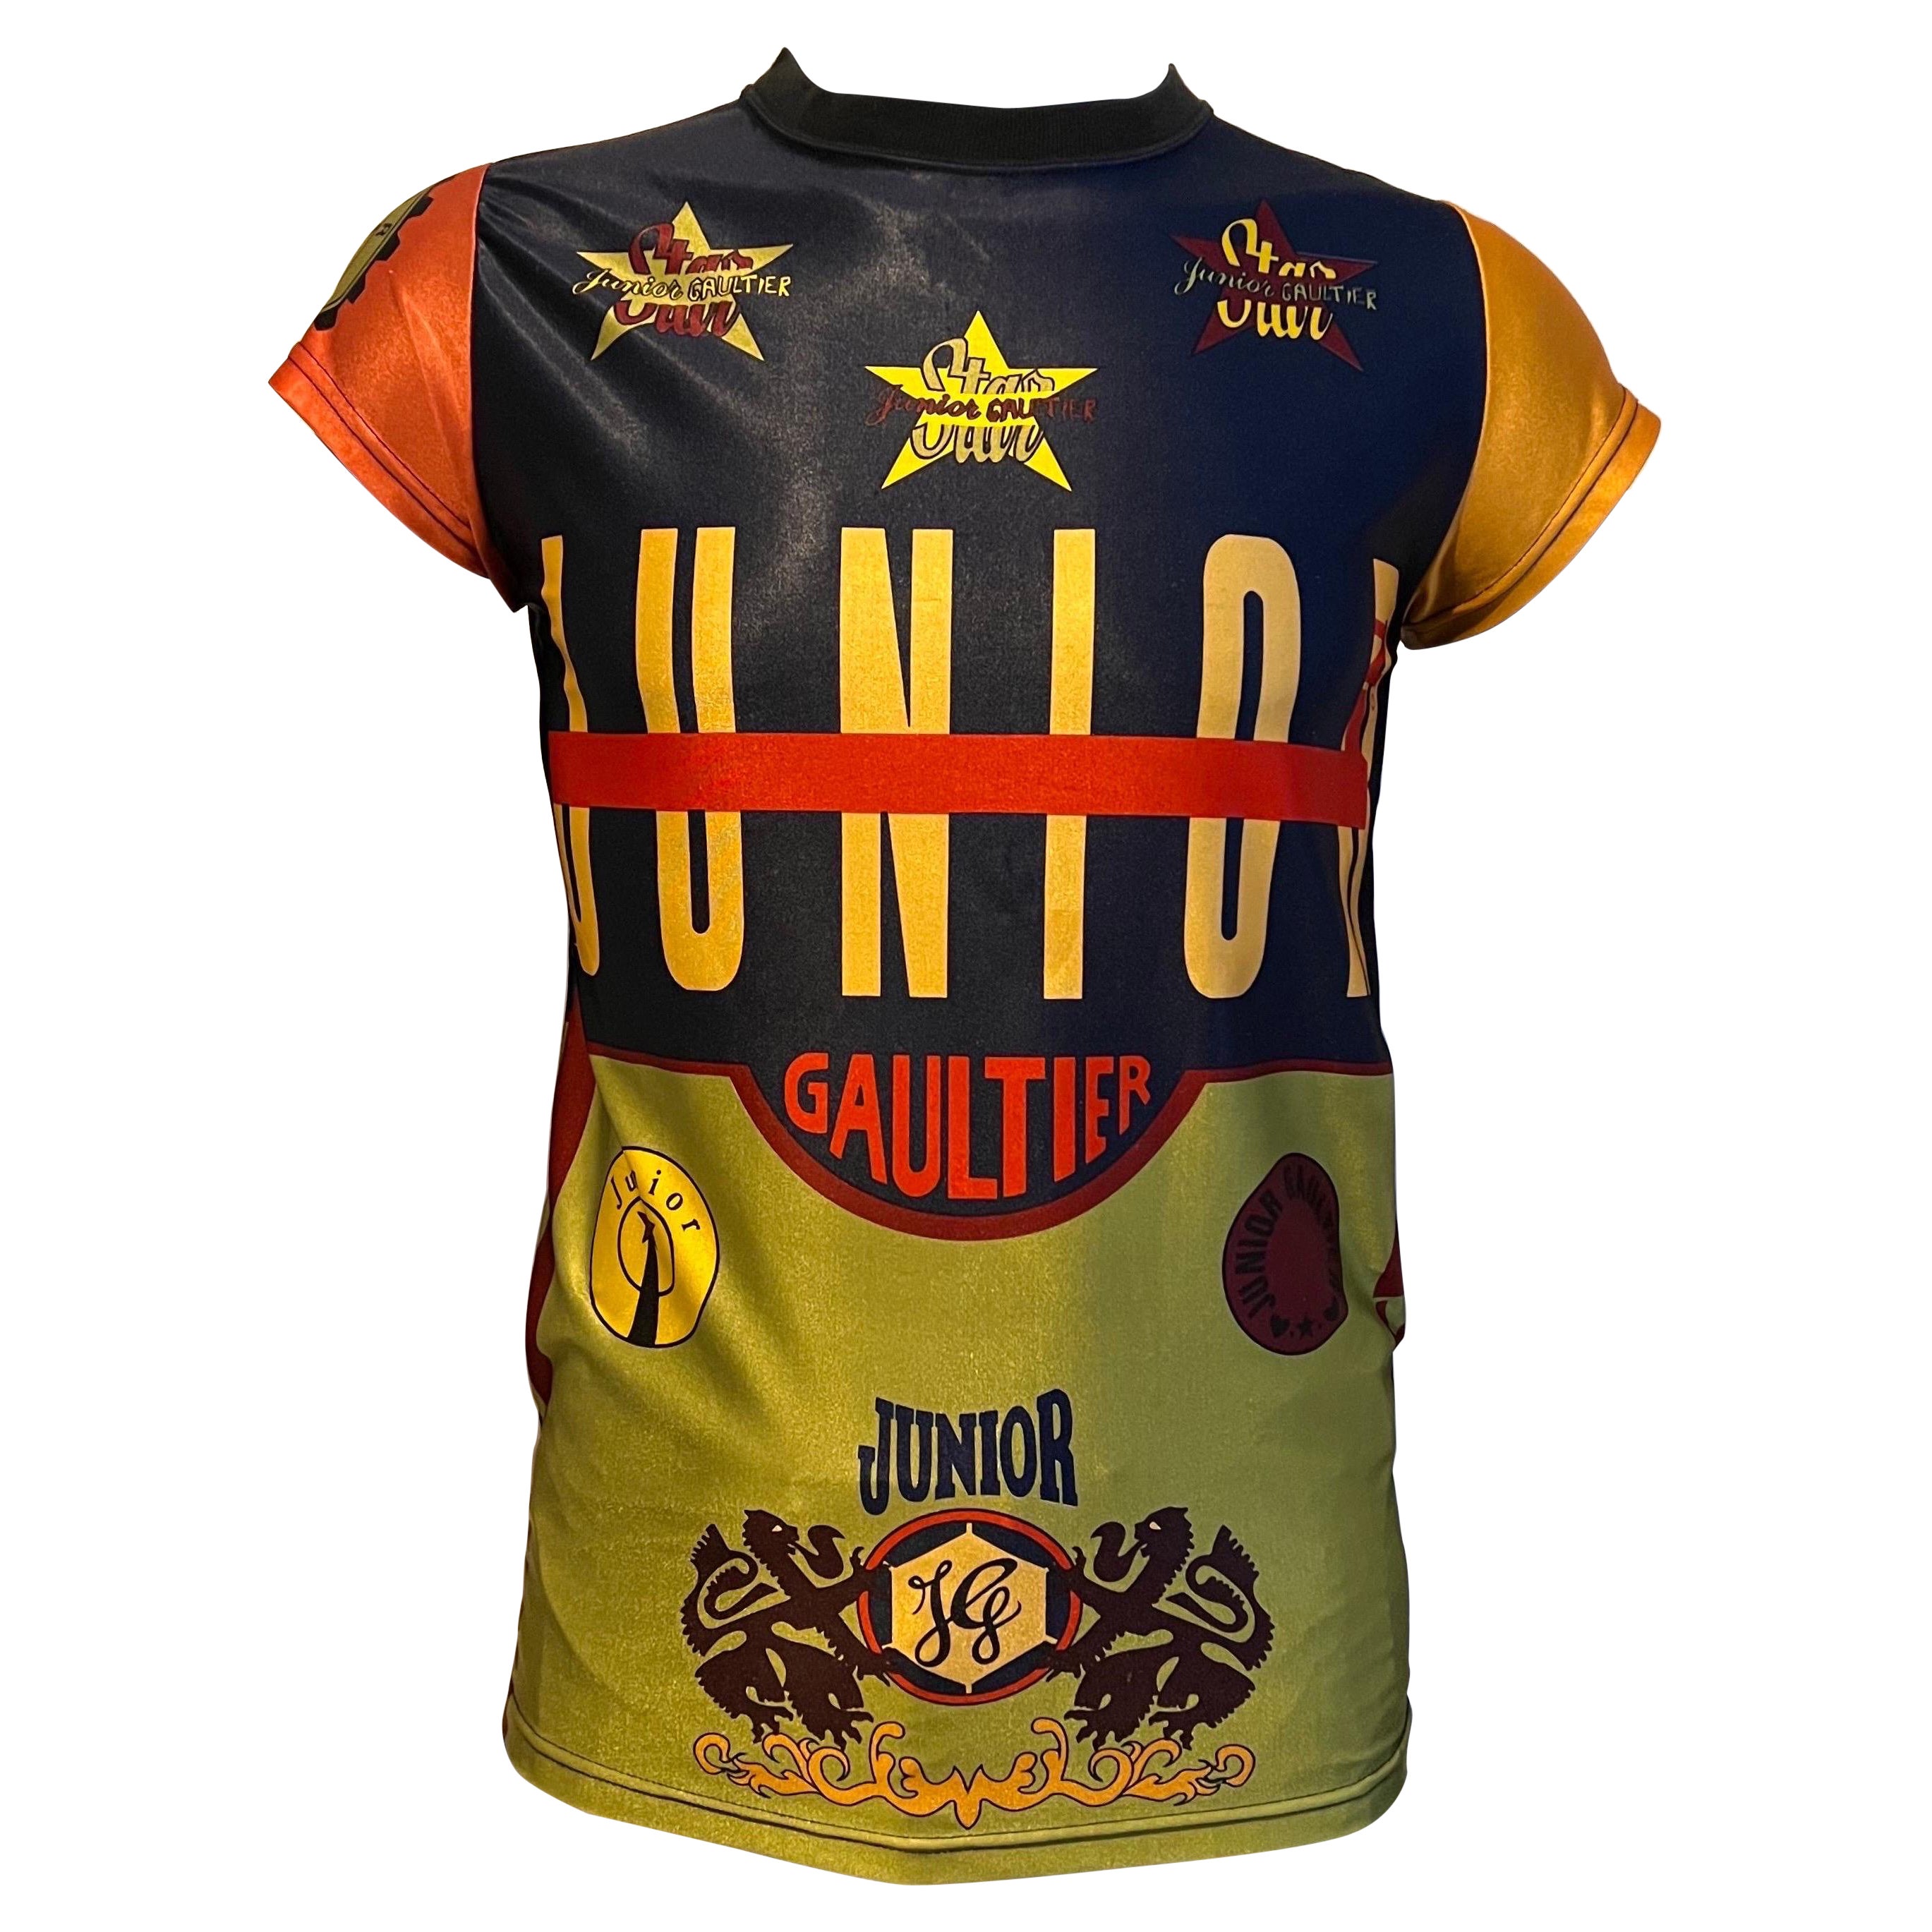 Vintage 1990’s Junior Gaultier iconic multicoloured graphic logo tee shirt  For Sale